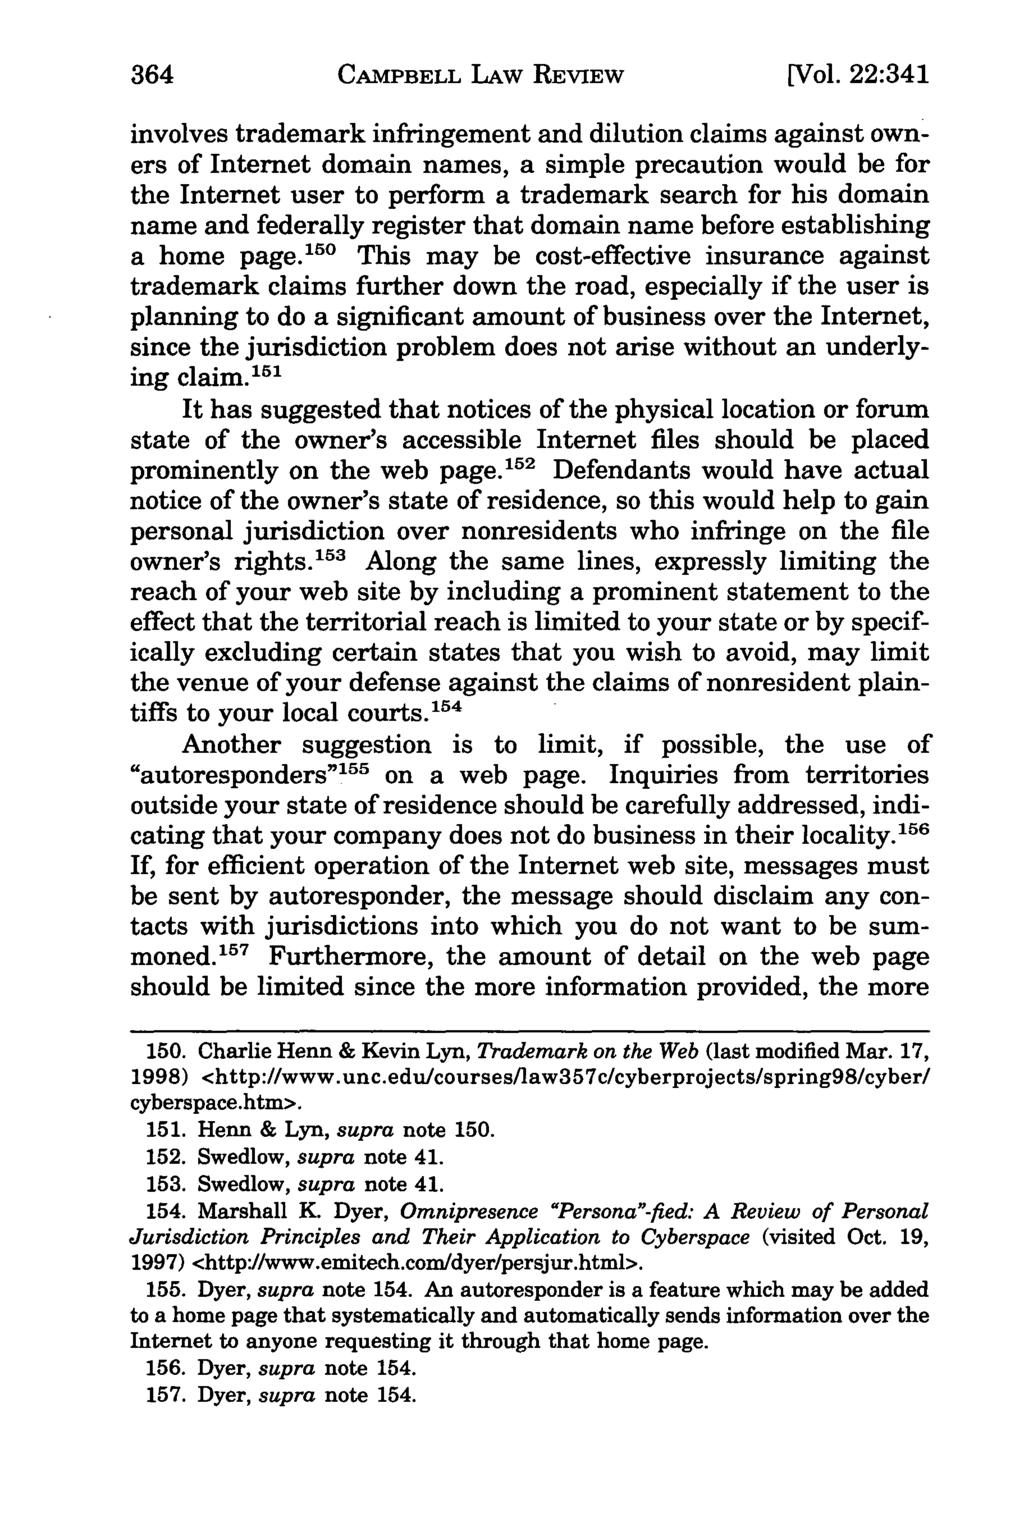 364 Campbell Law Review, Vol. 22, Iss. 2 [2000], Art. 3 CAMPBELL LAW REVIEW [Vol.